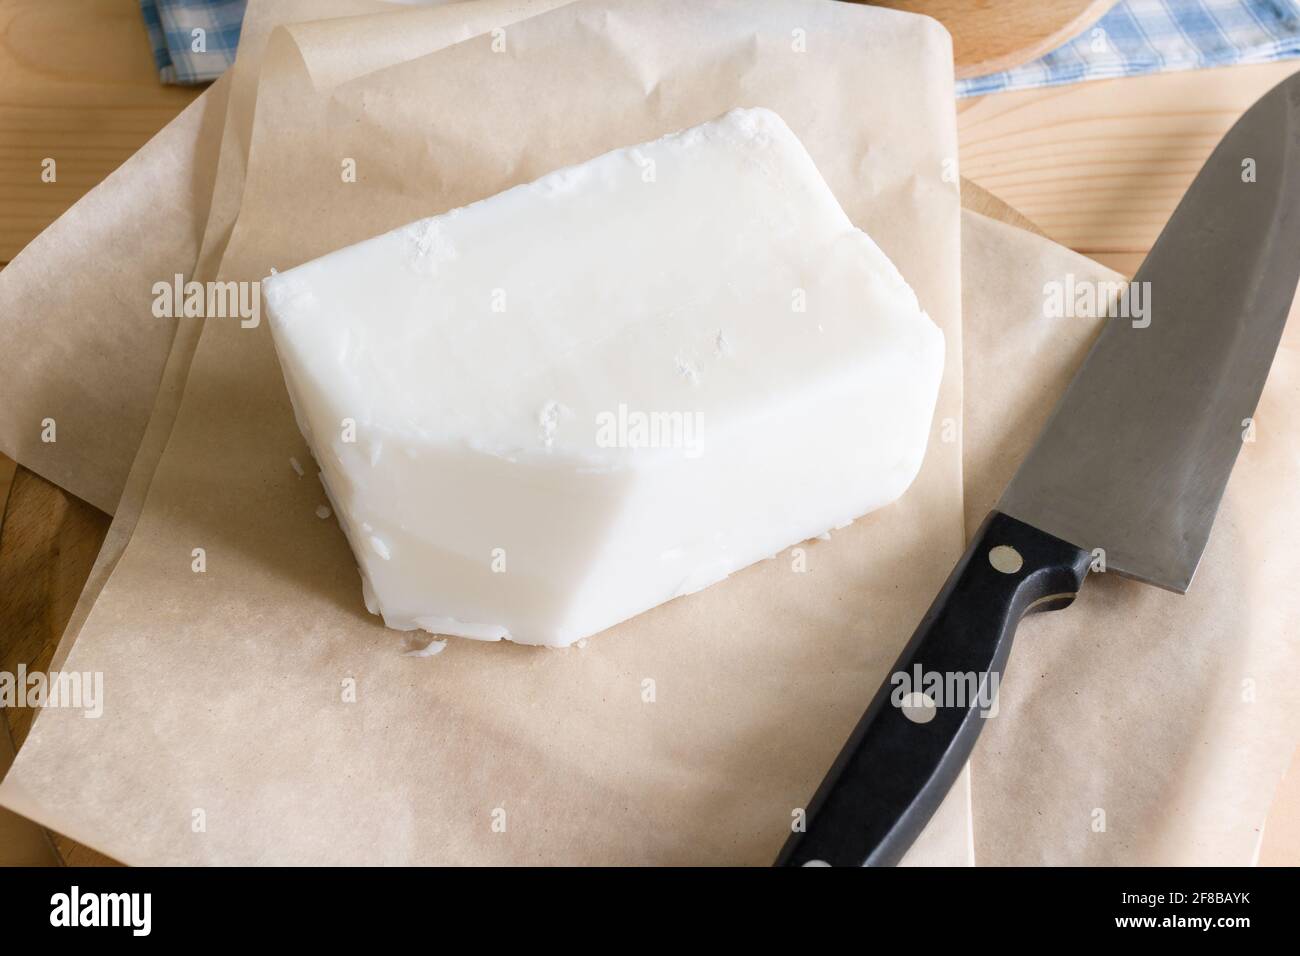 Beef dripping or Tallow a rendered form of beef or mutton fat used in cooking or as a traditional shortening Stock Photo